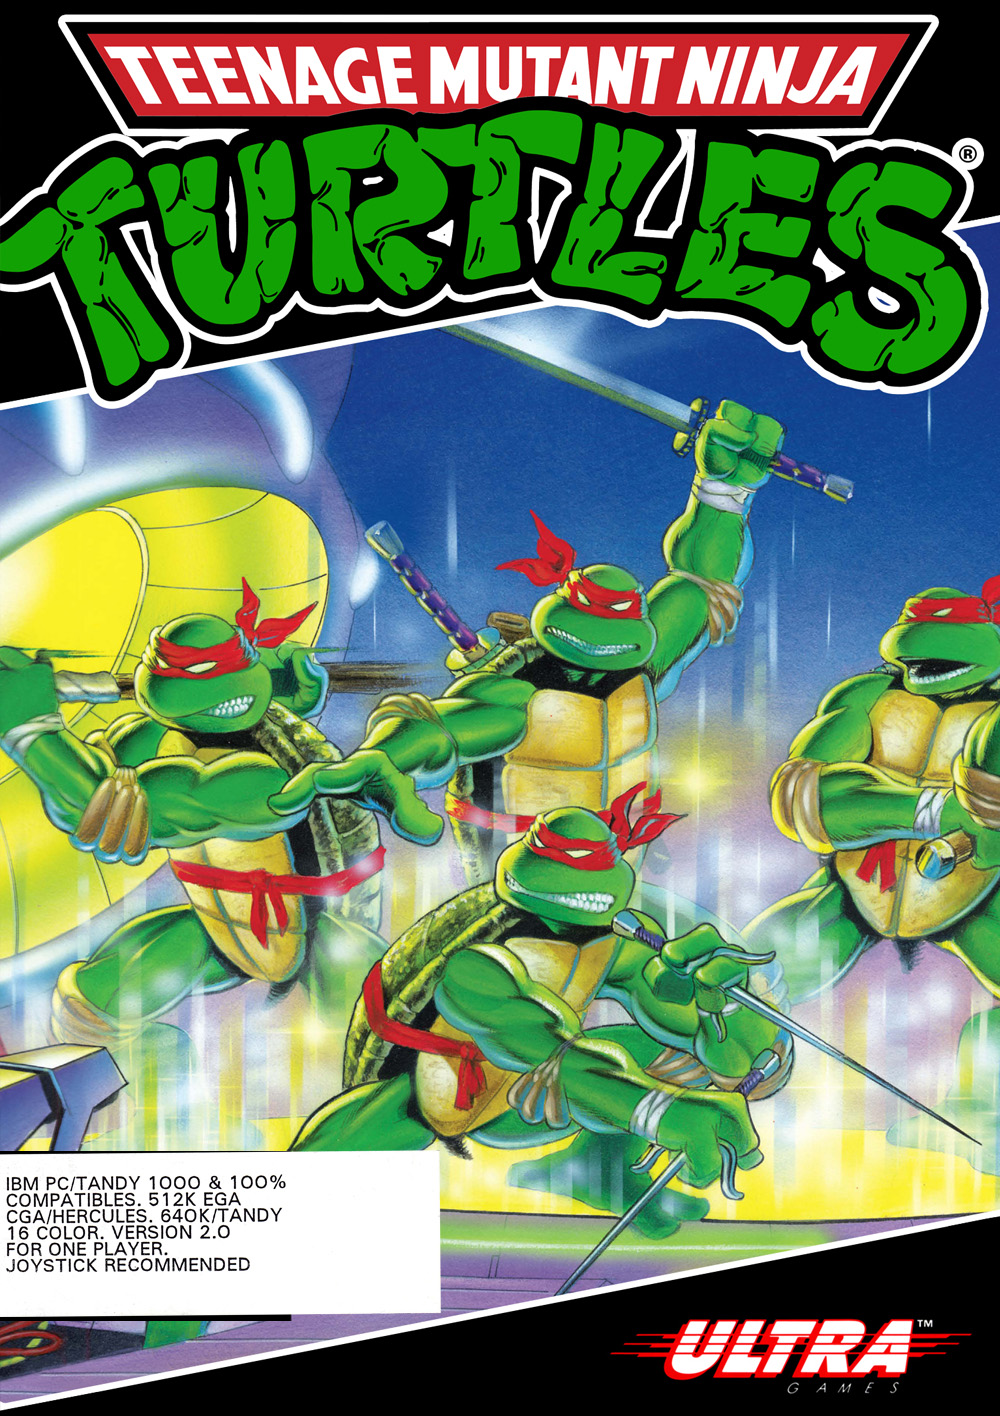 ninja turtles pc game requires dongle